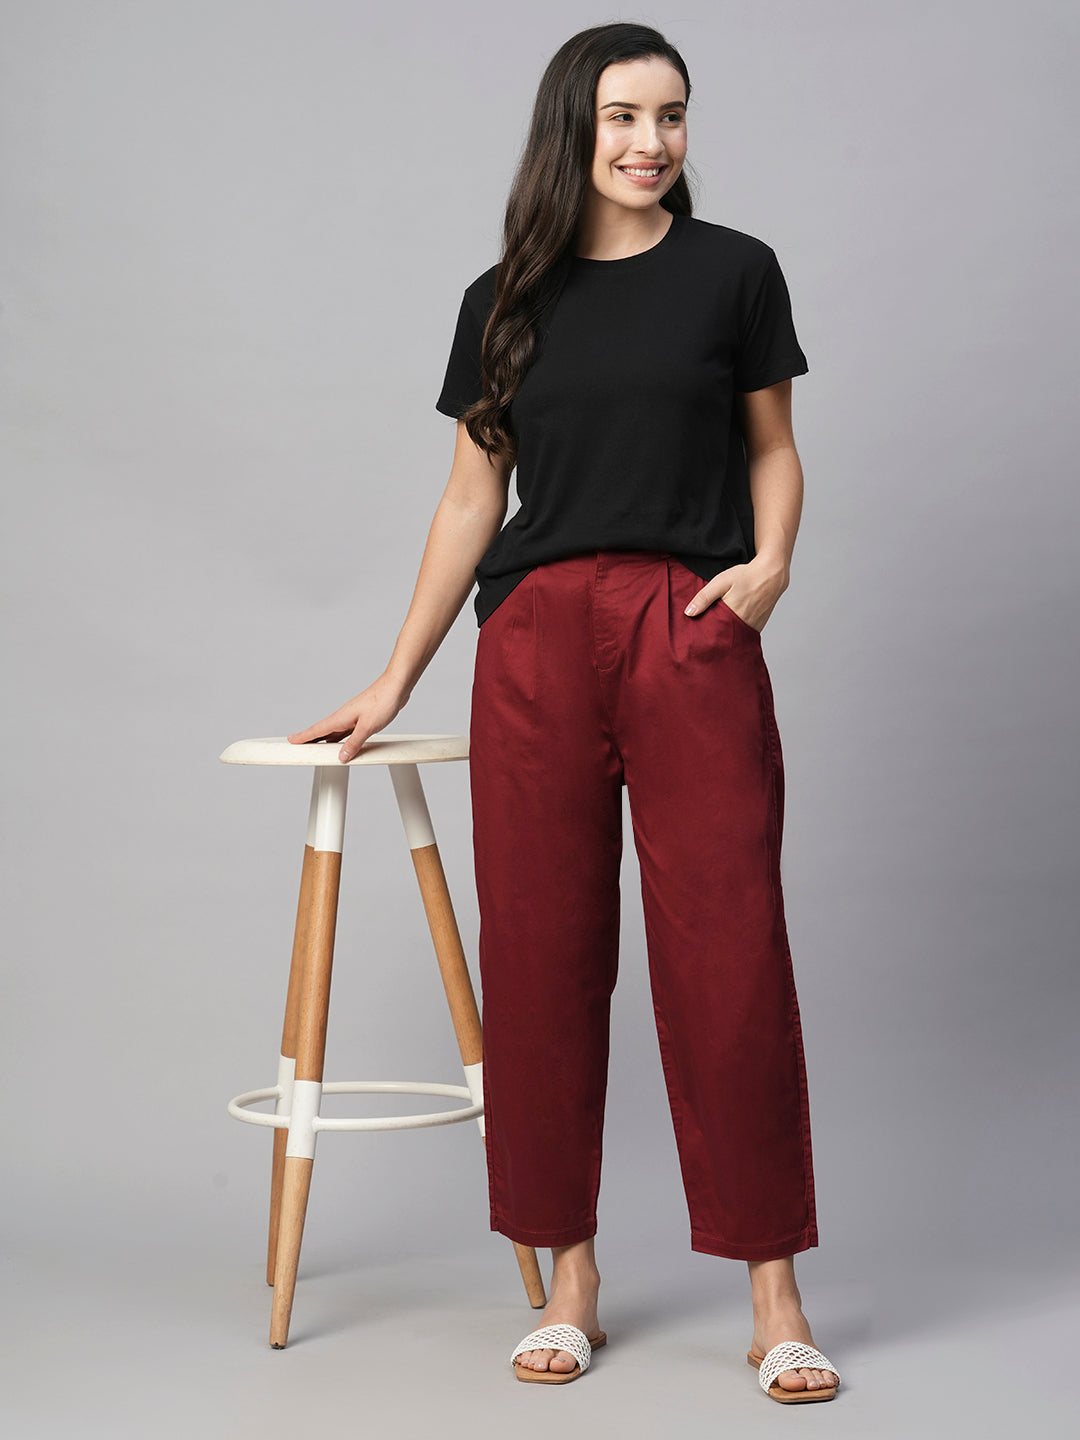 Women's Maroon/Red Cotton Elastane Loose Fit Pant